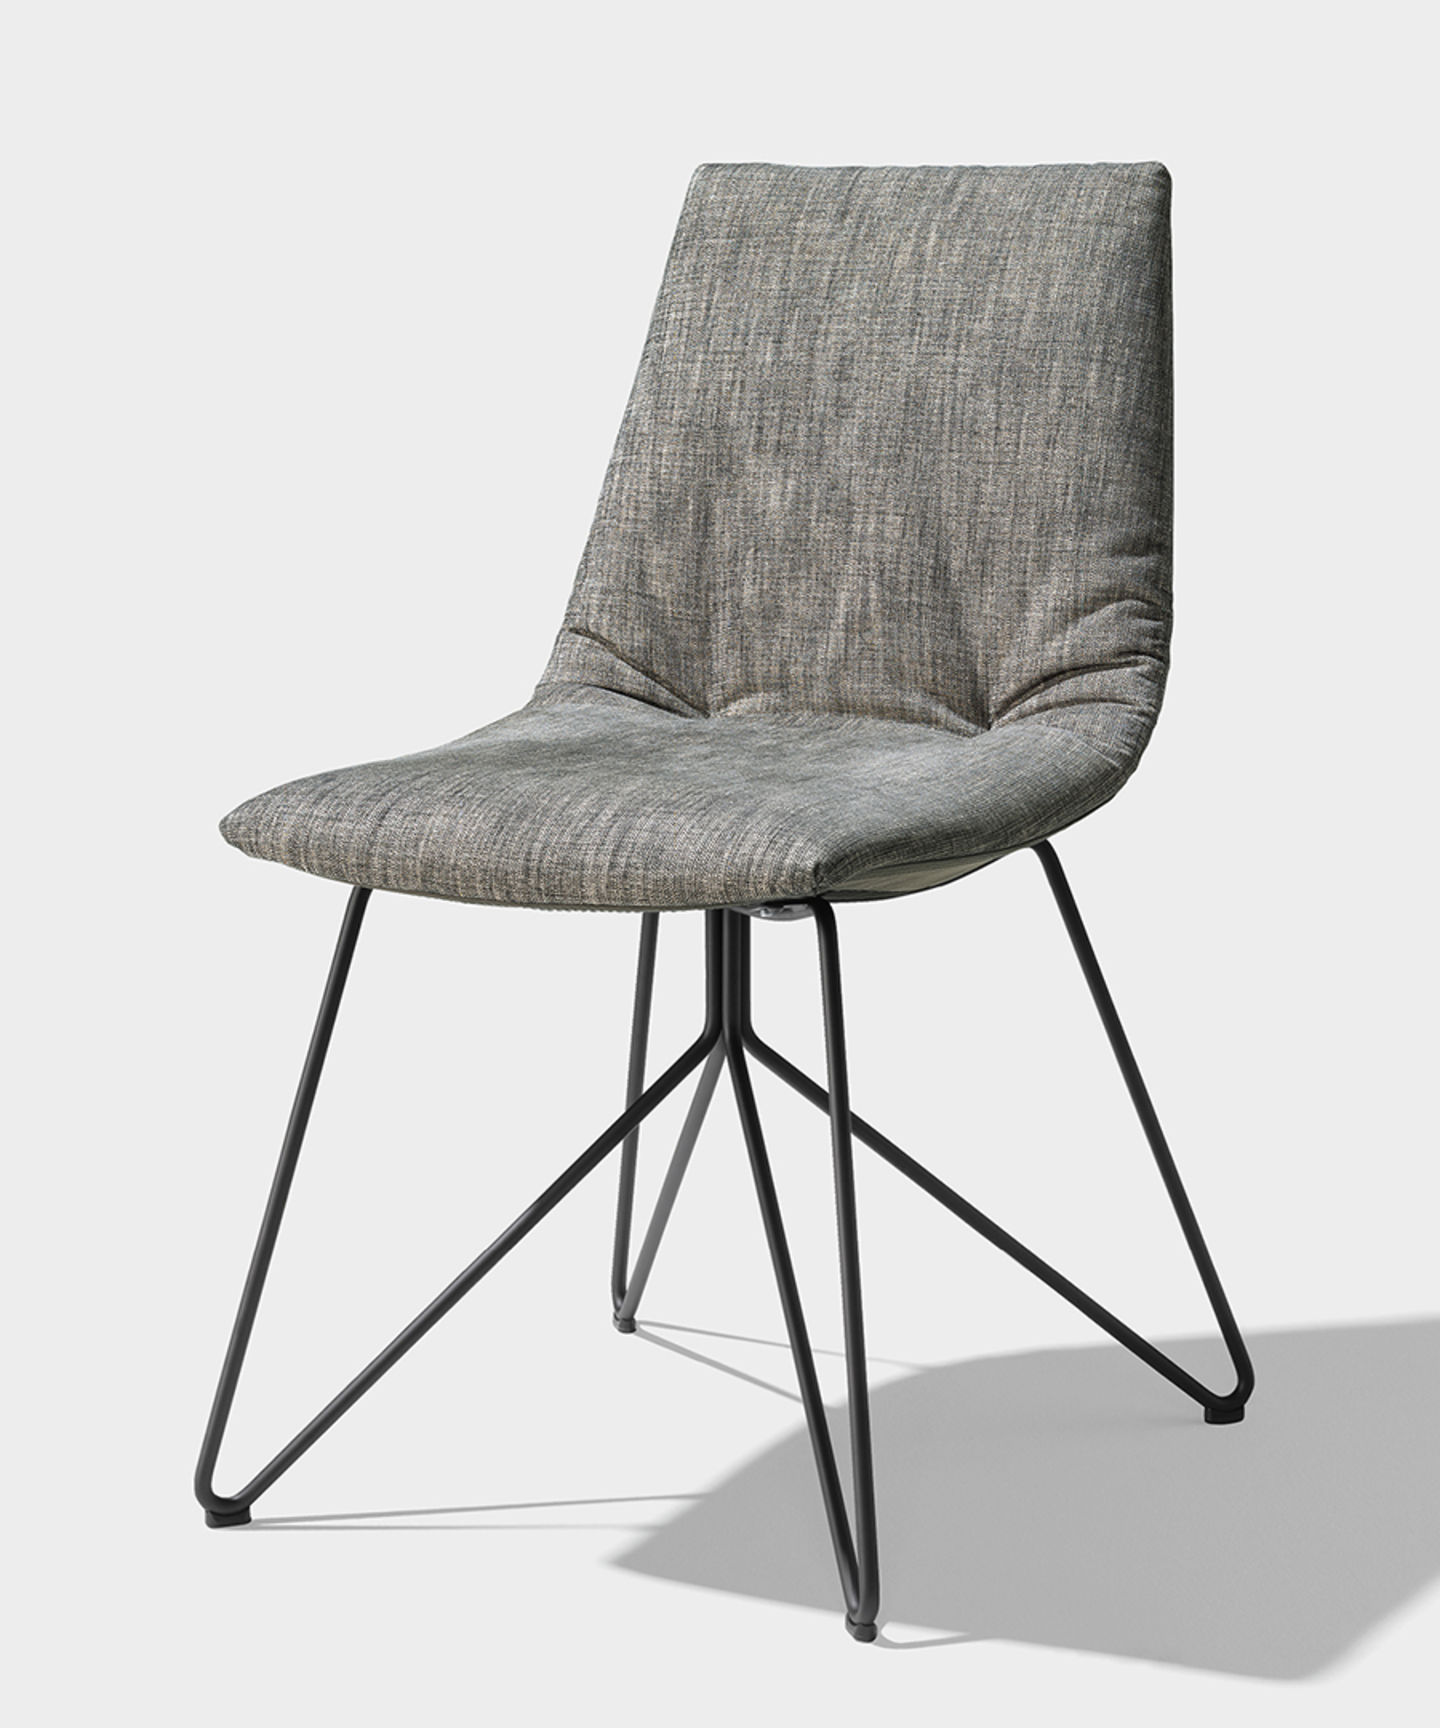 lui chair fabric maple wire frame stainless steel finish